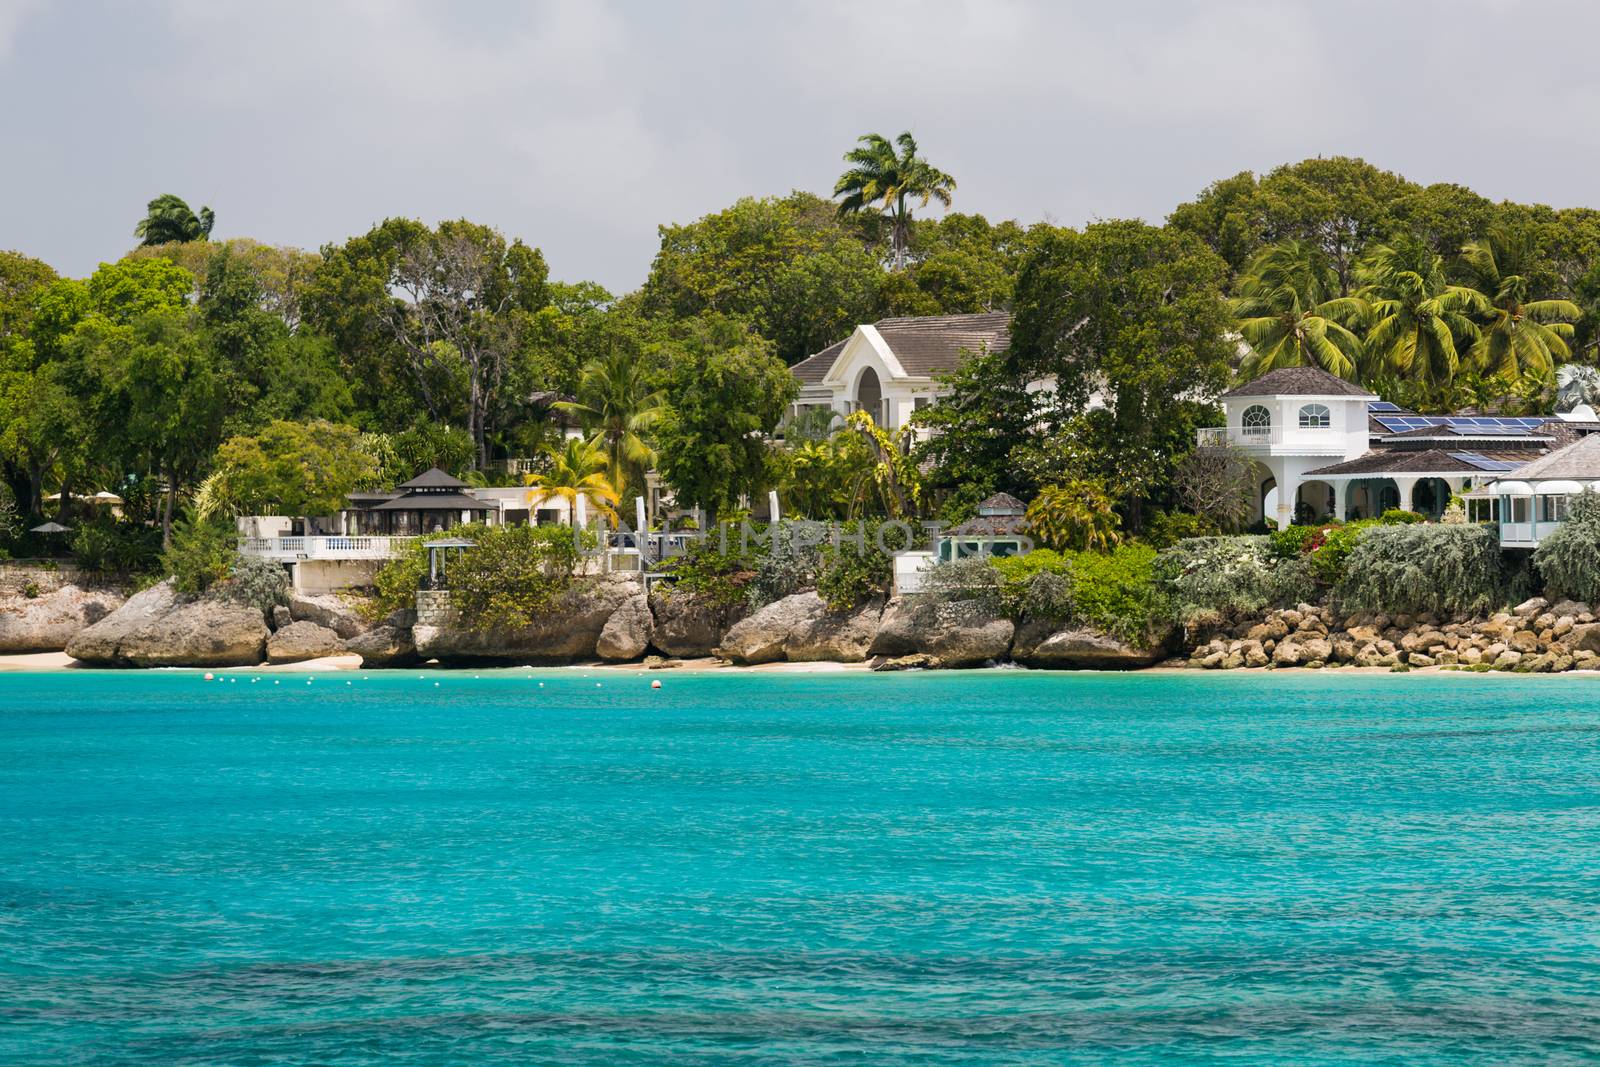 Residences off the coast of Barbados by chrisukphoto